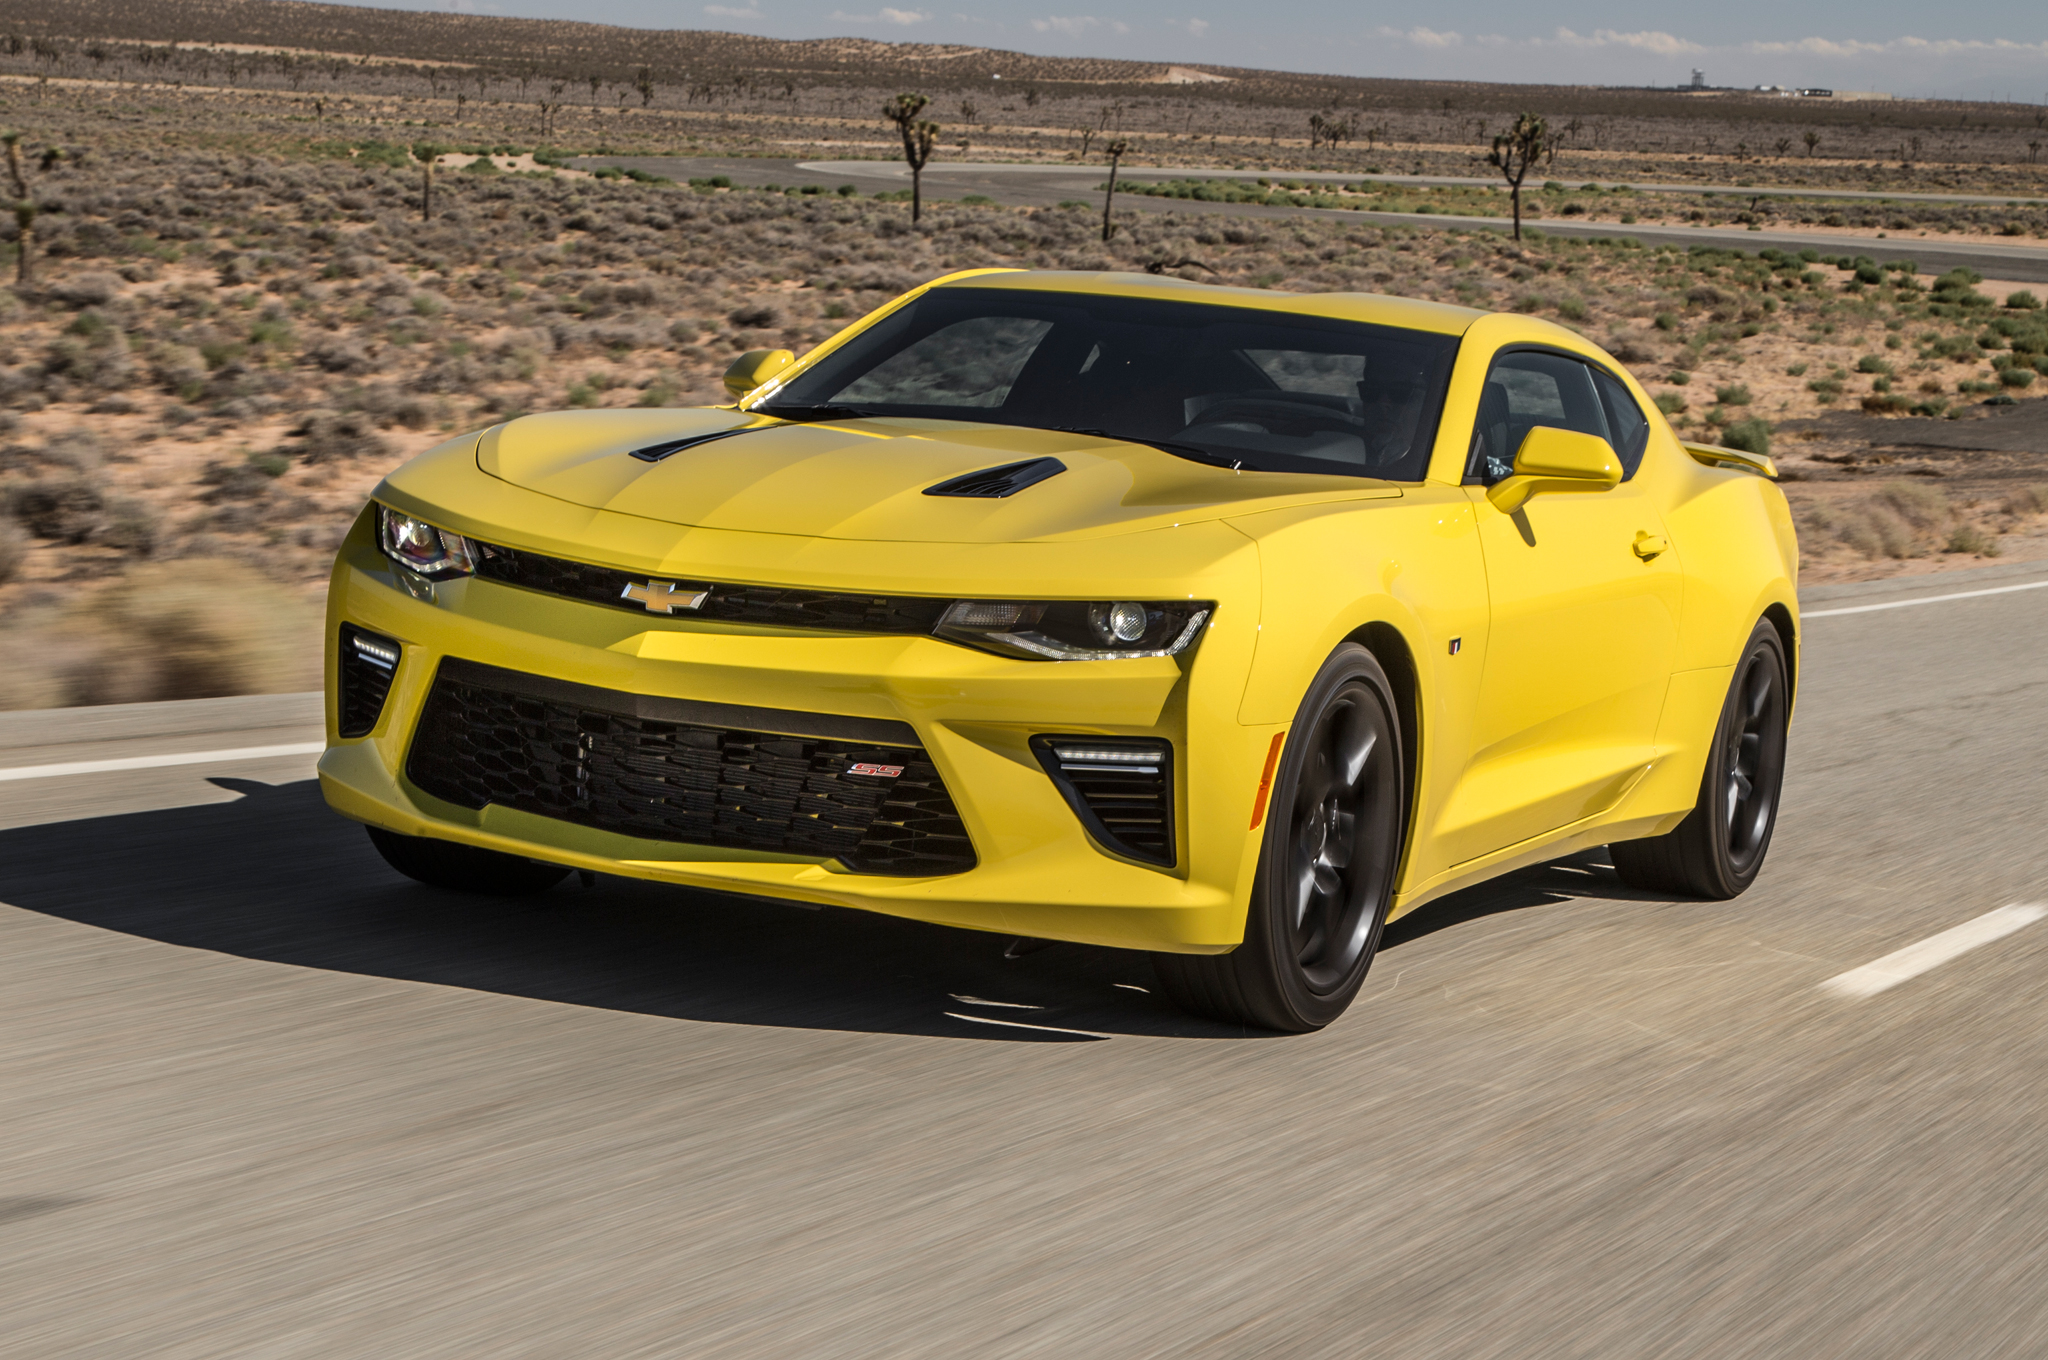 New Muscle Cars - 2016 Chevrolet Camaro SS